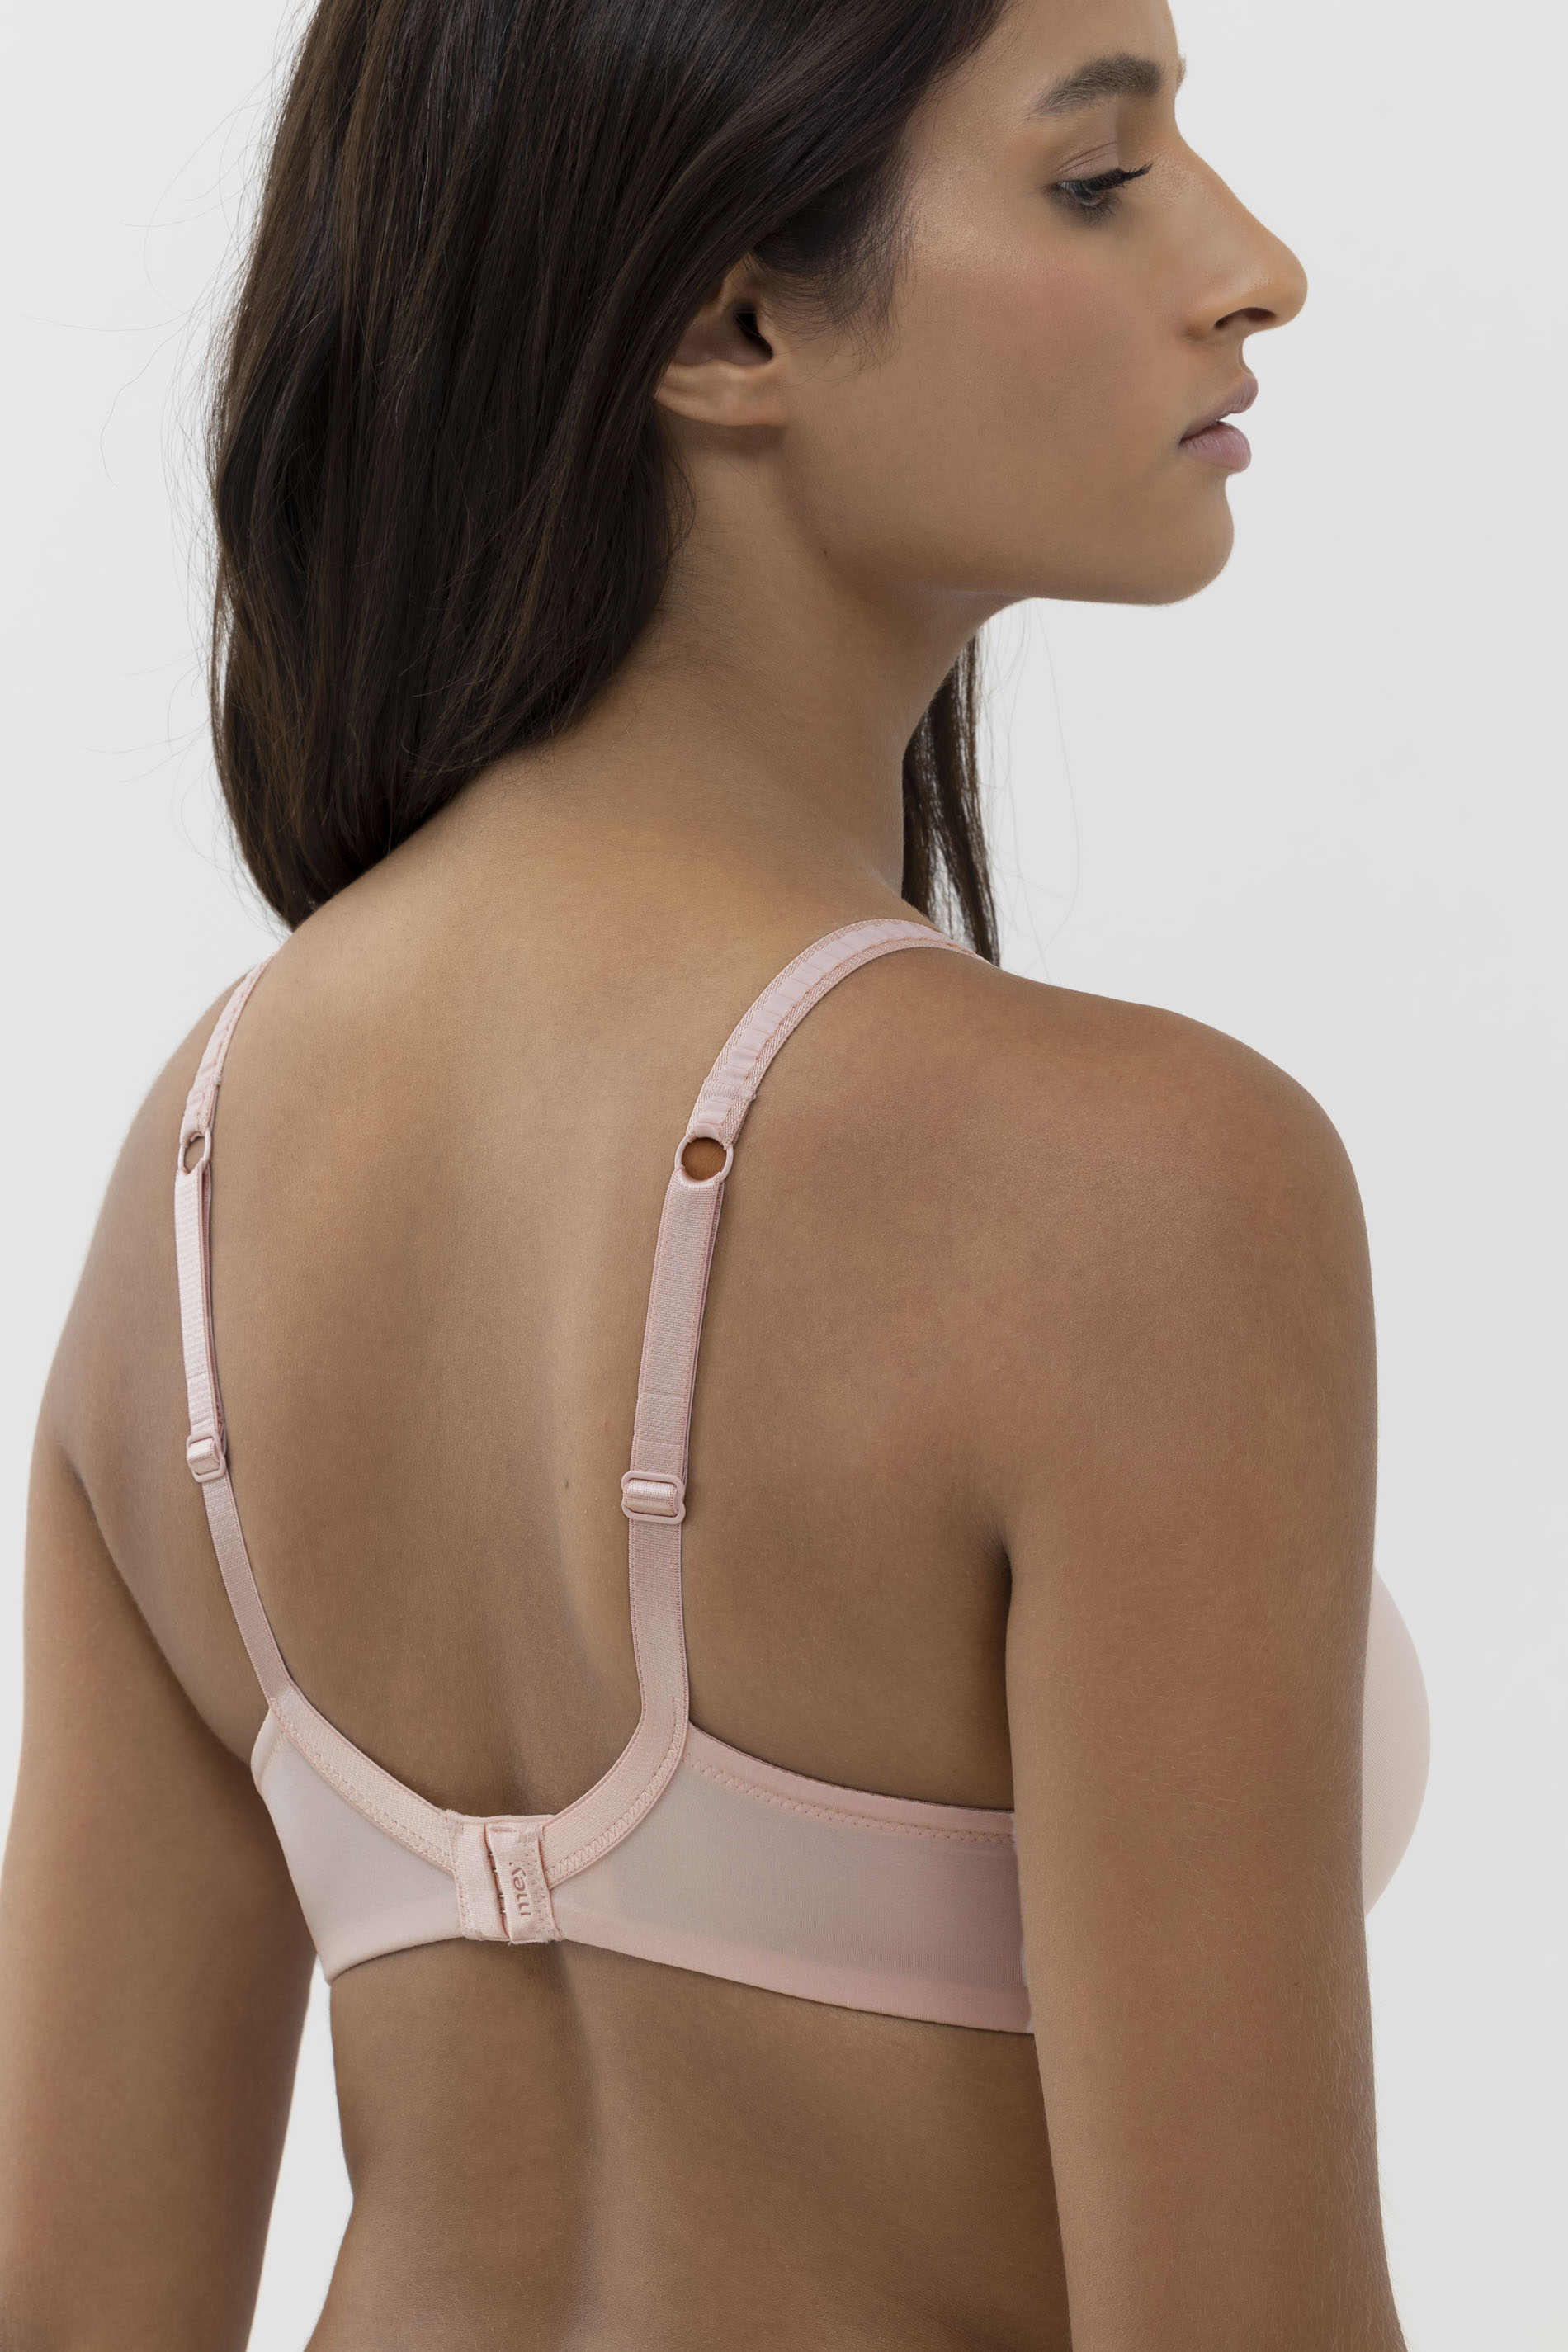 Spacer bra | Full Cup Serie Joan Detail View 01 | mey®